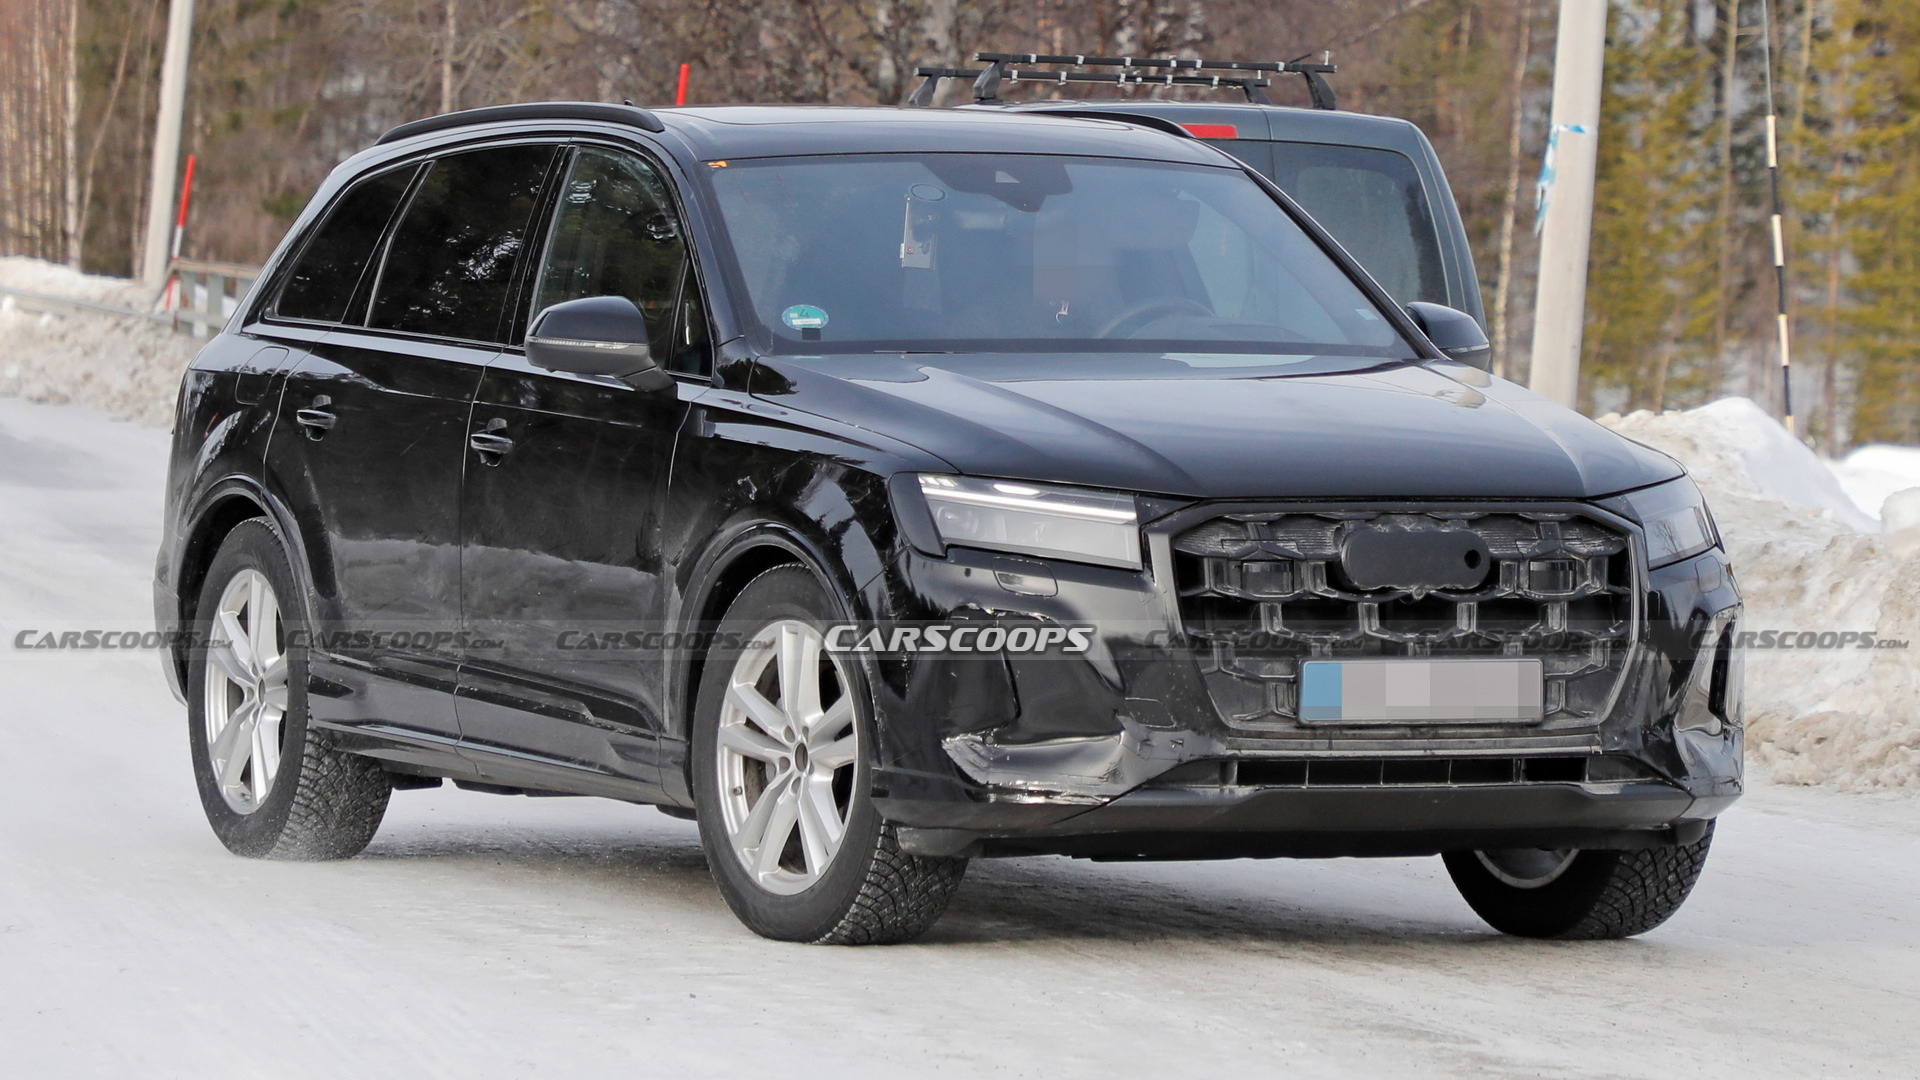 2024 Audi Q7 Facelift Rendered Based On First Spy Photos, 60 OFF